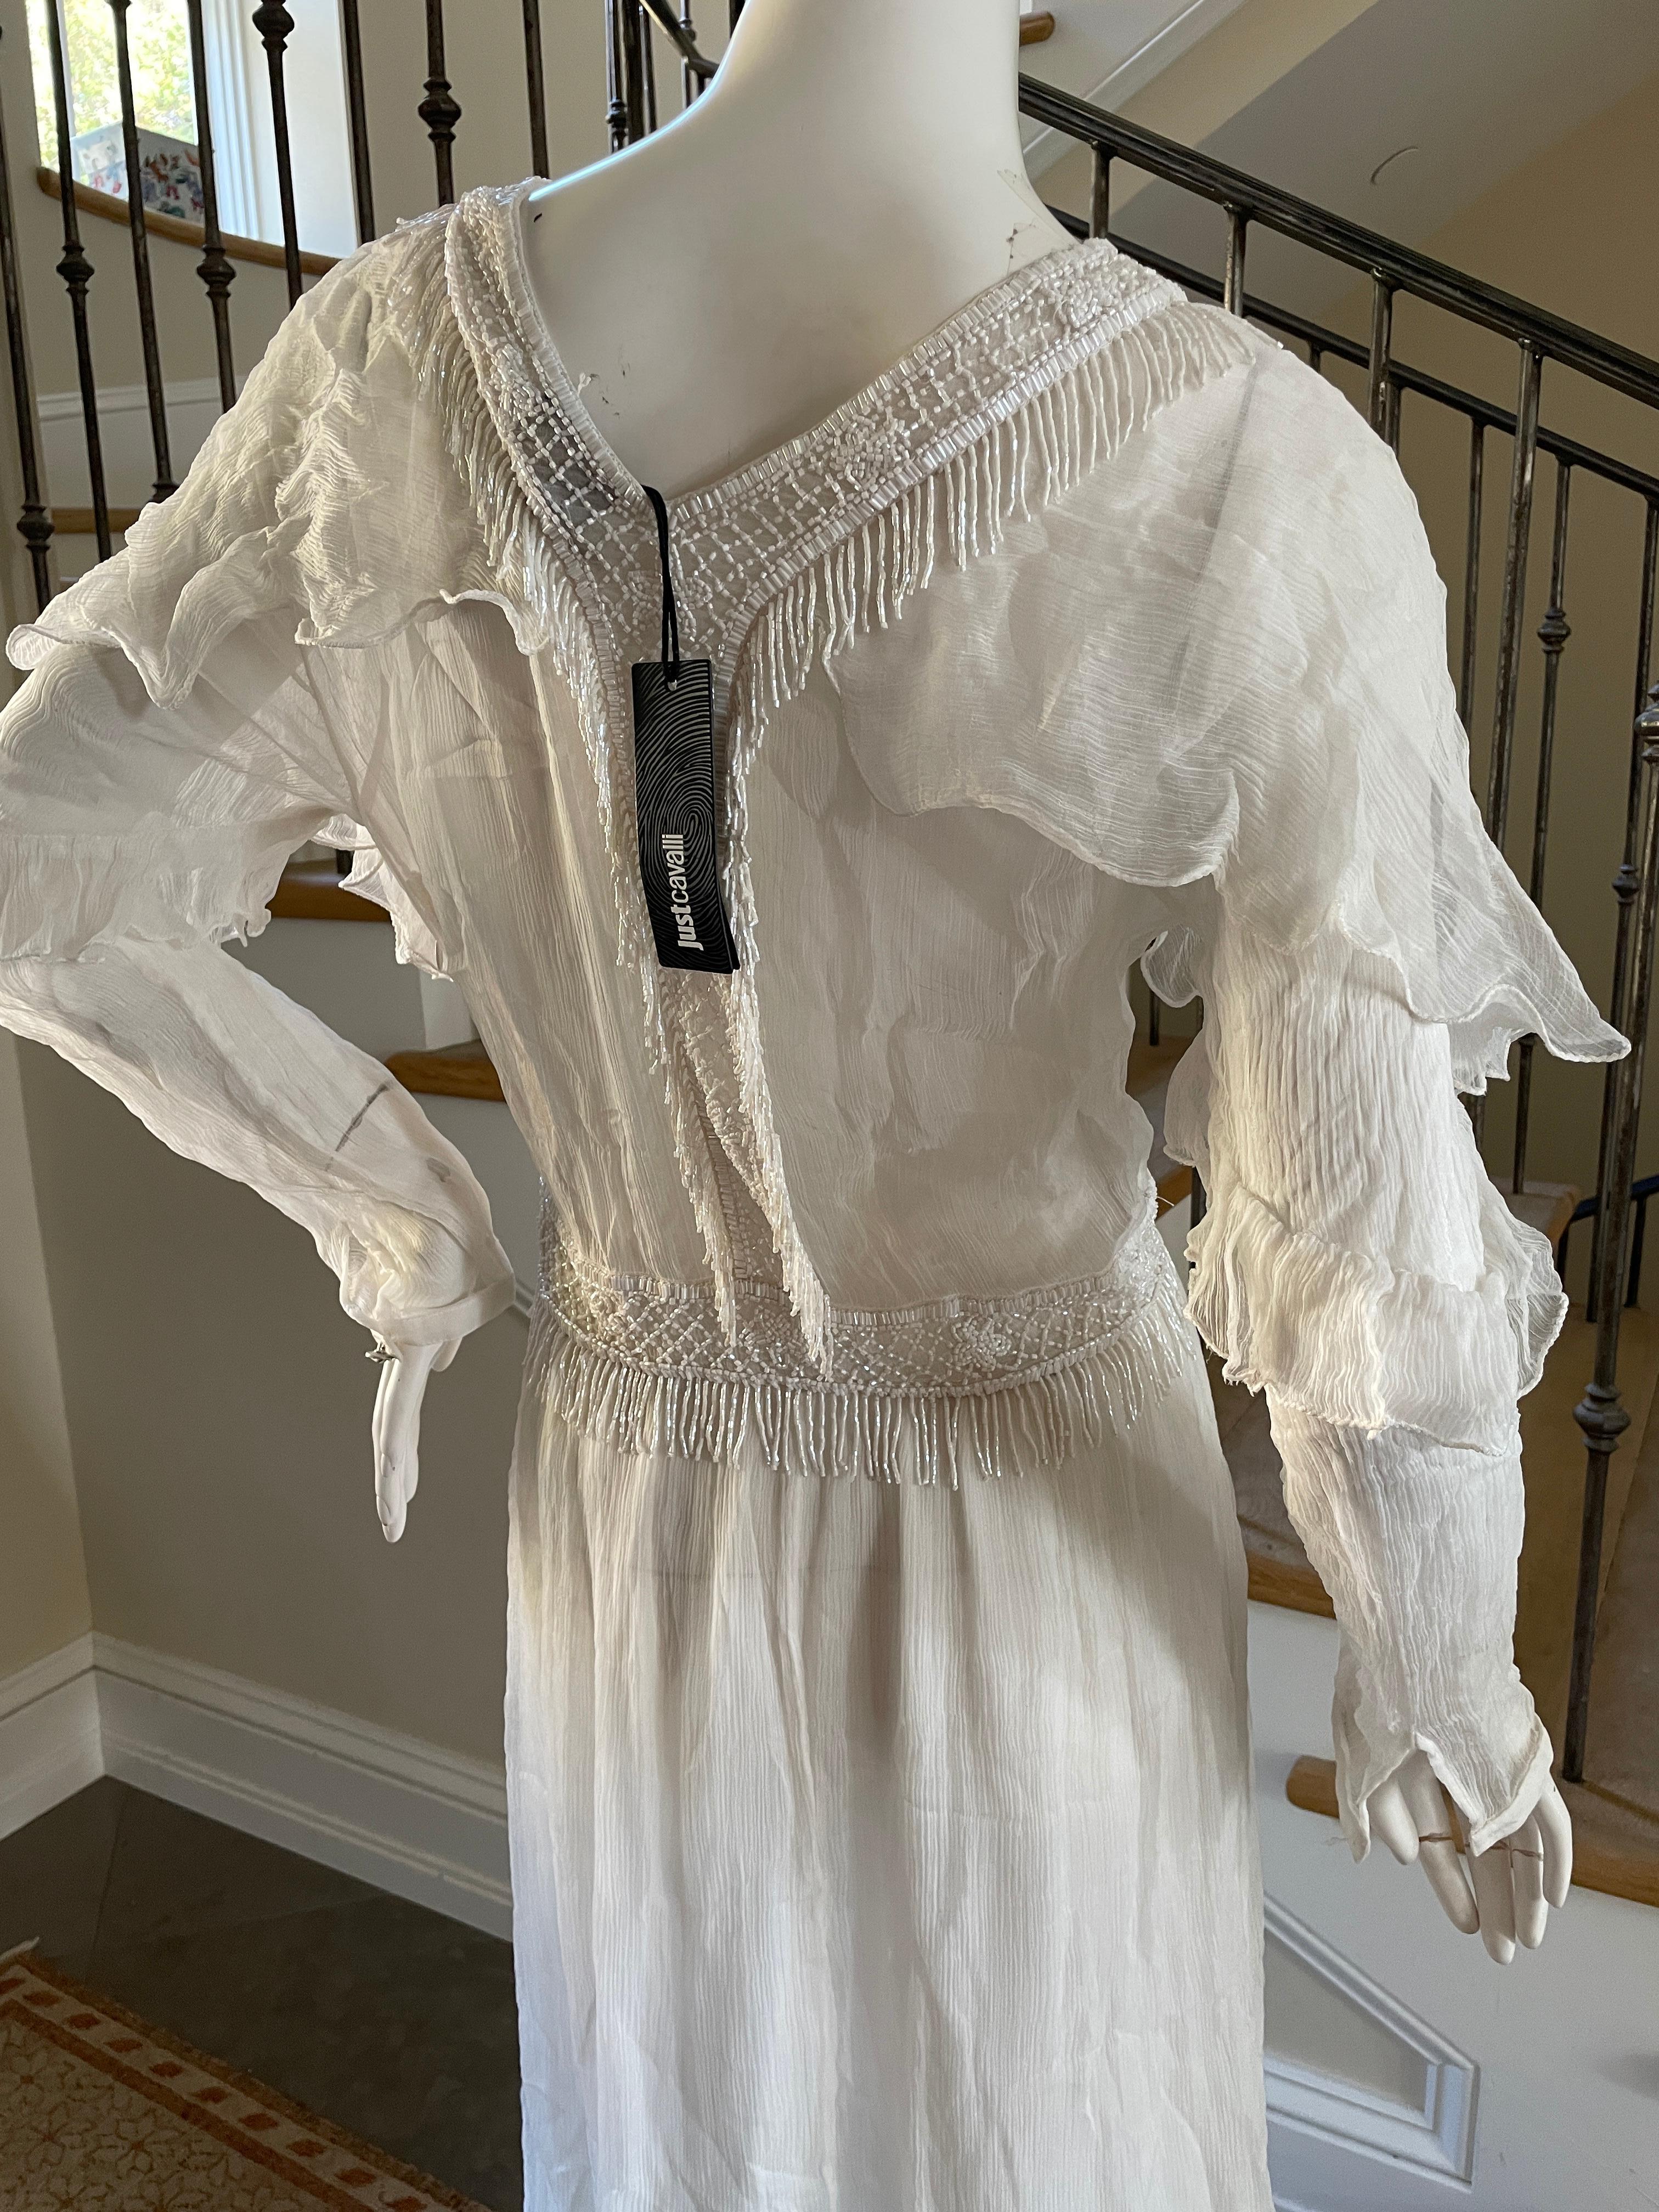 Just Cavalli Romantic Vintage White Dress w Bead Fringe by Roberto Cavalli NWT In New Condition For Sale In Cloverdale, CA